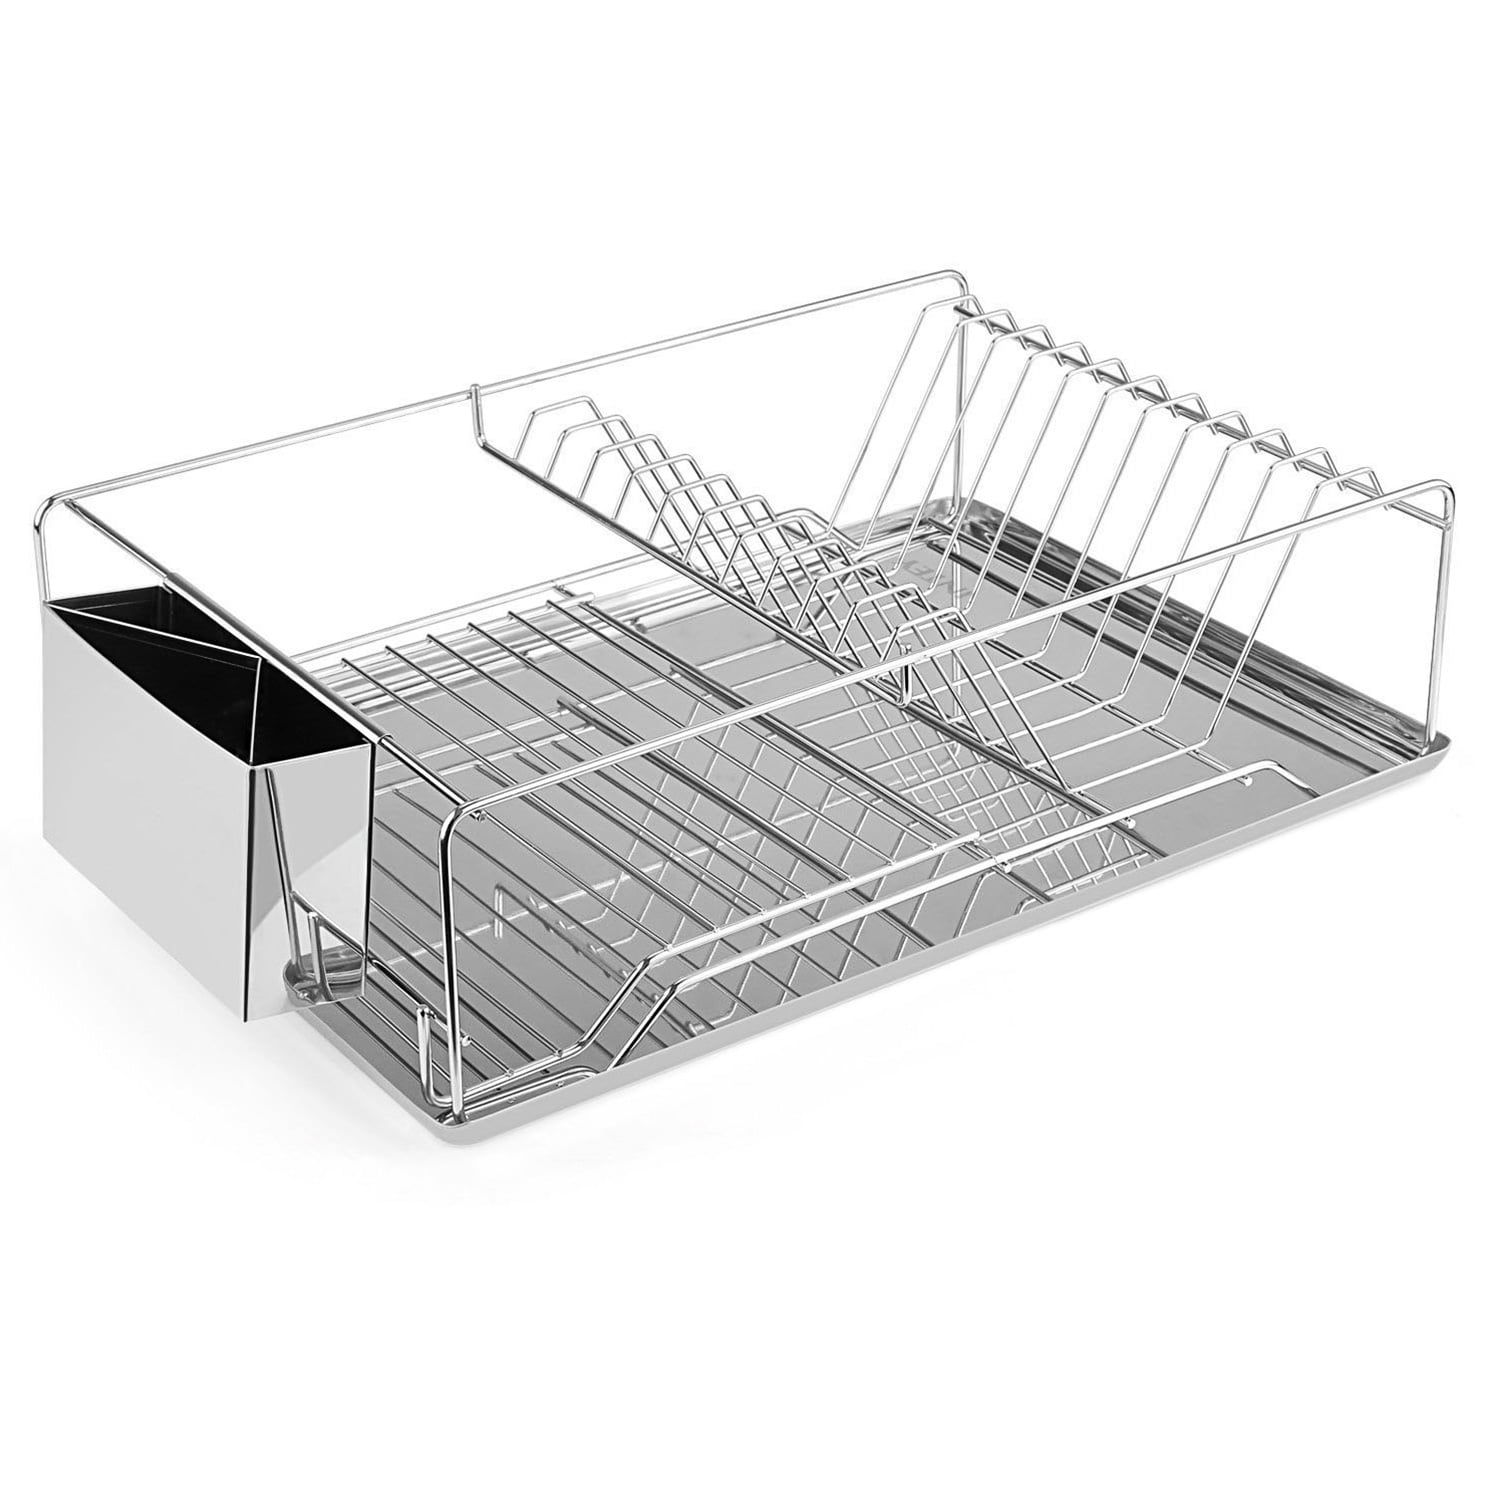 Oumilen Rose Gold Aluminum Dish Rack, Counter Rustproof Dish Storage with  Cutlery Holder, Removable Drainer Tray HT-RKD23-24 - The Home Depot